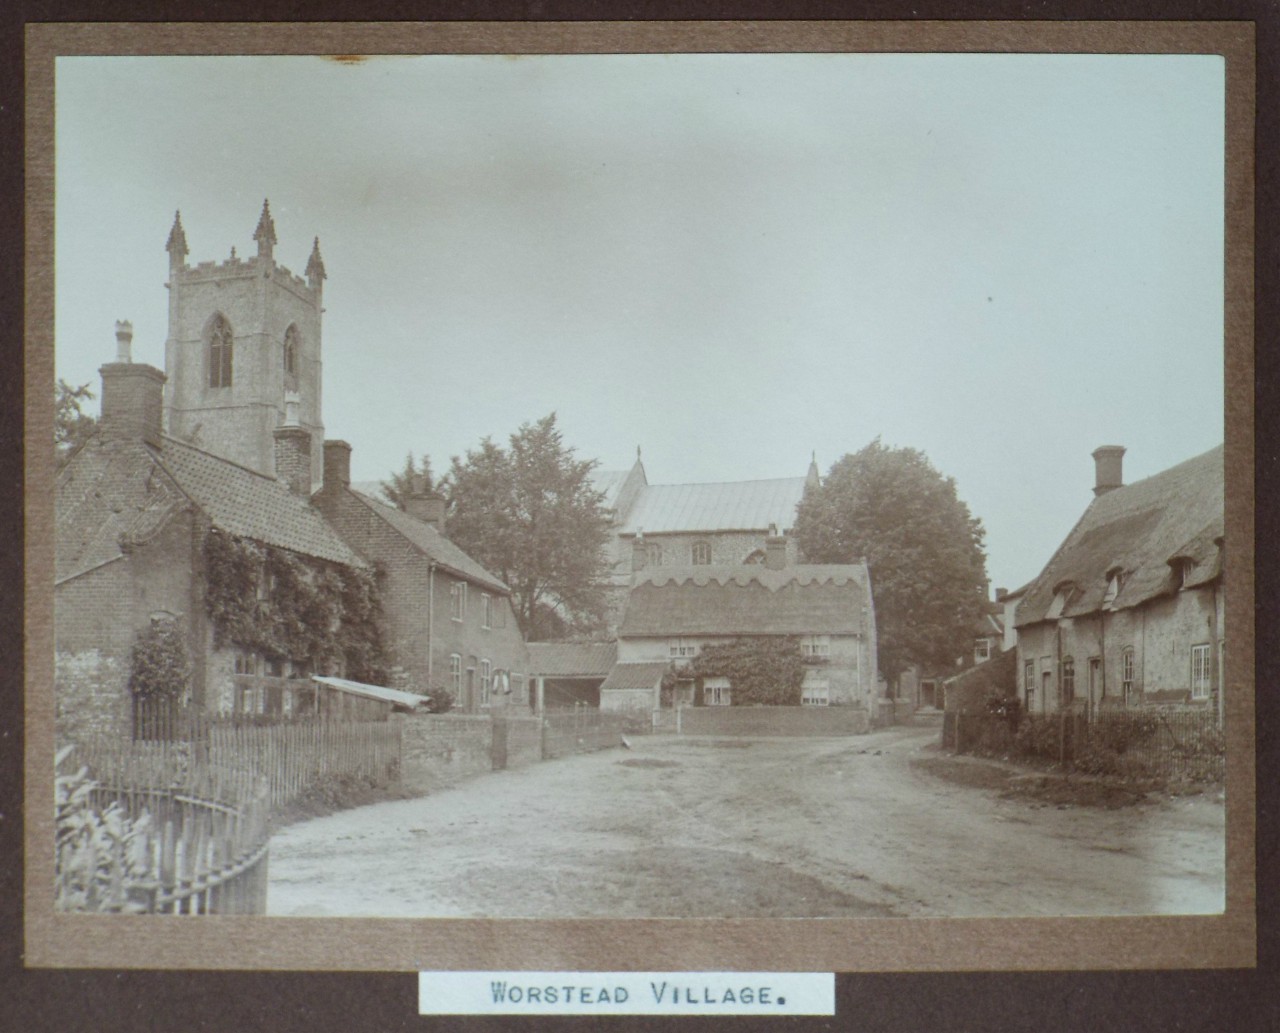 Photograph - Worsted Village.